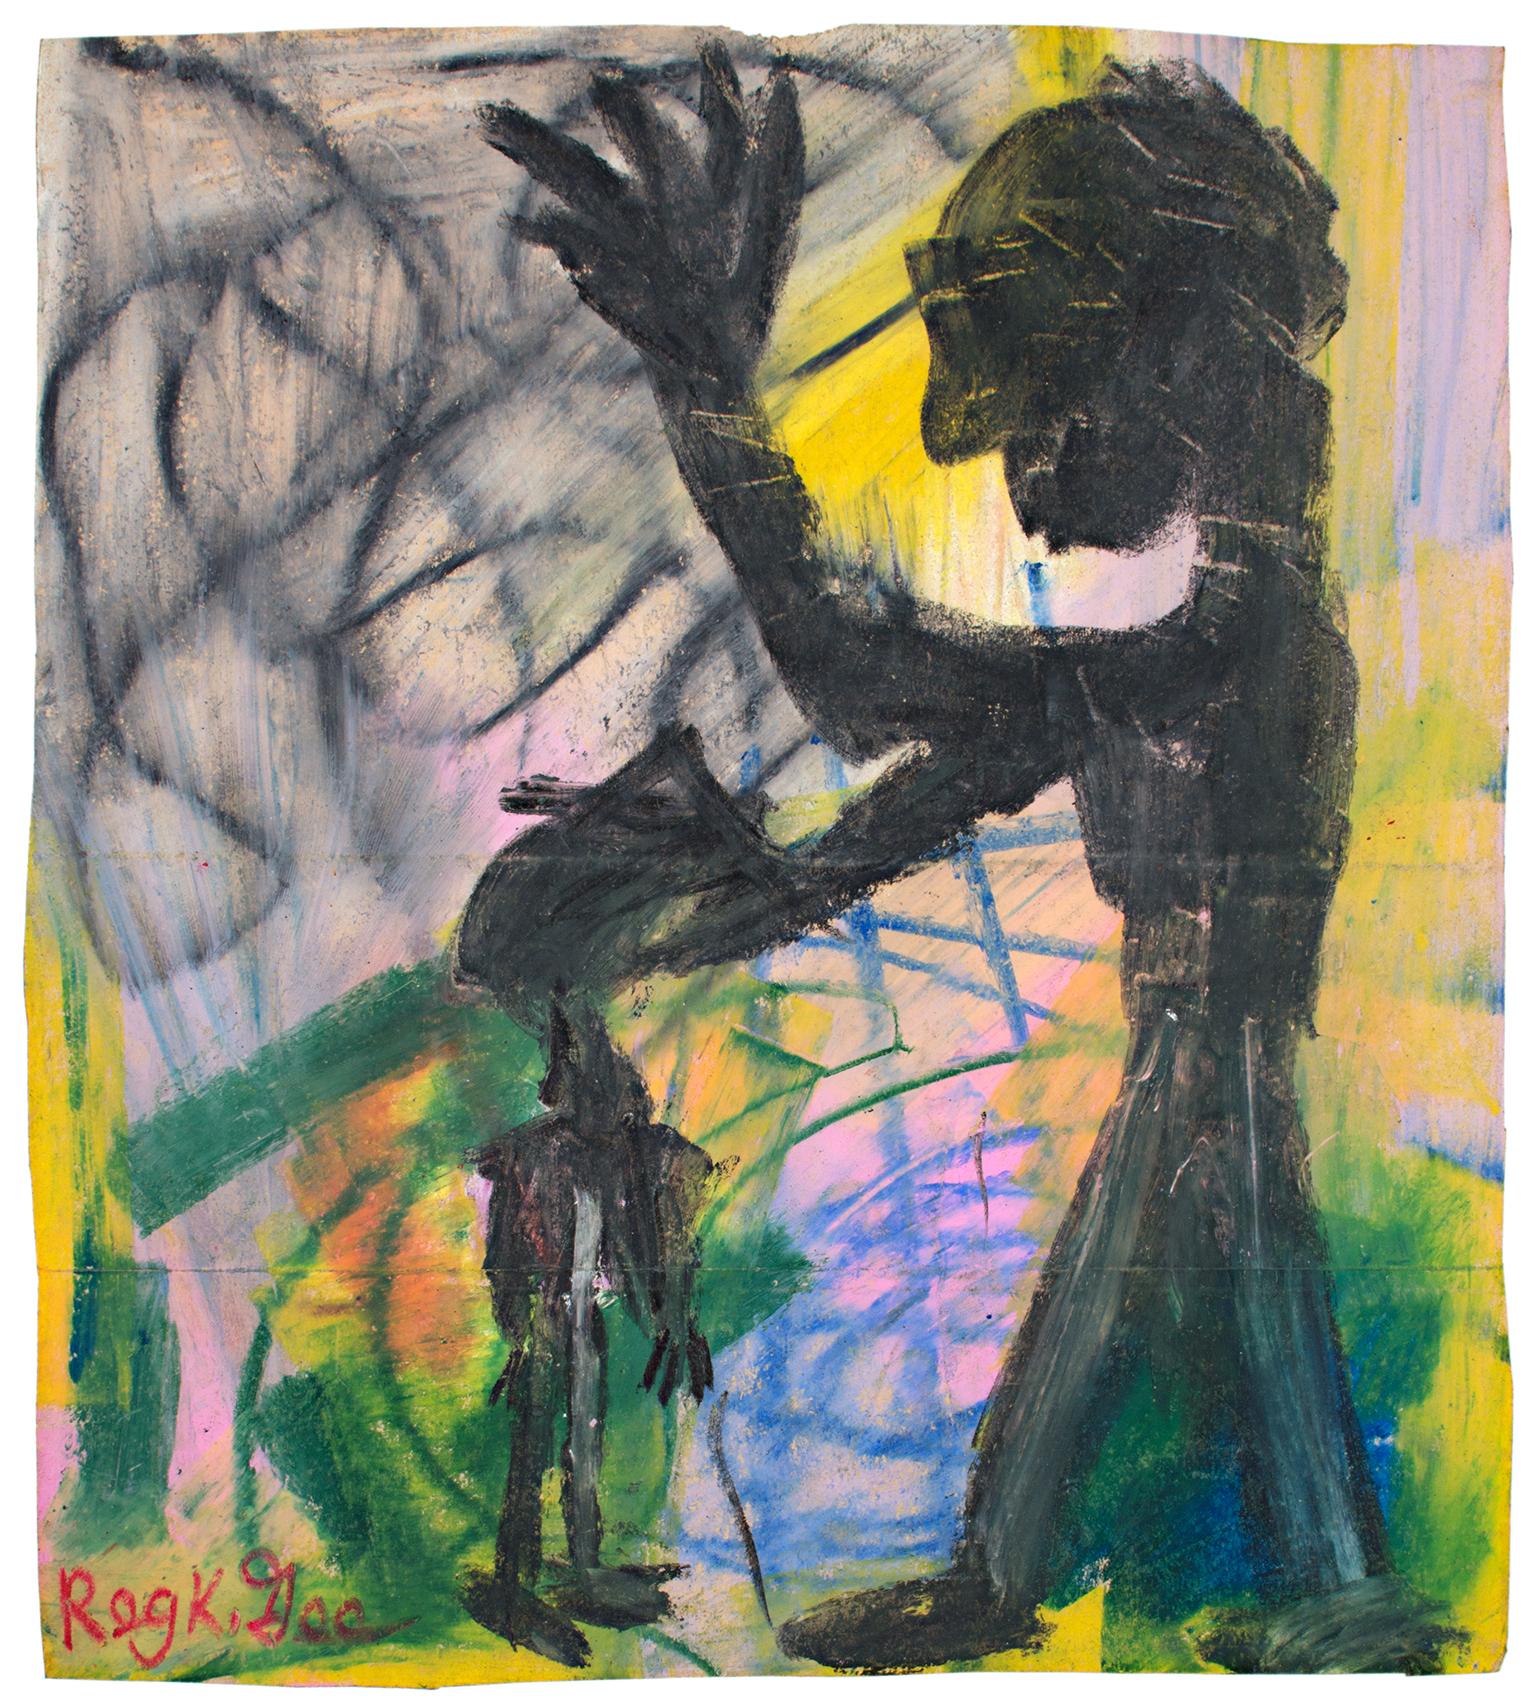 "Praying for Sam" is an original oil pastel drawing on a Safeway grocery bag by Reginald K. Gee. The artist signed the piece lower left. This piece features a large silhouetted figure blessing a smaller silhouetted figure. The background is an